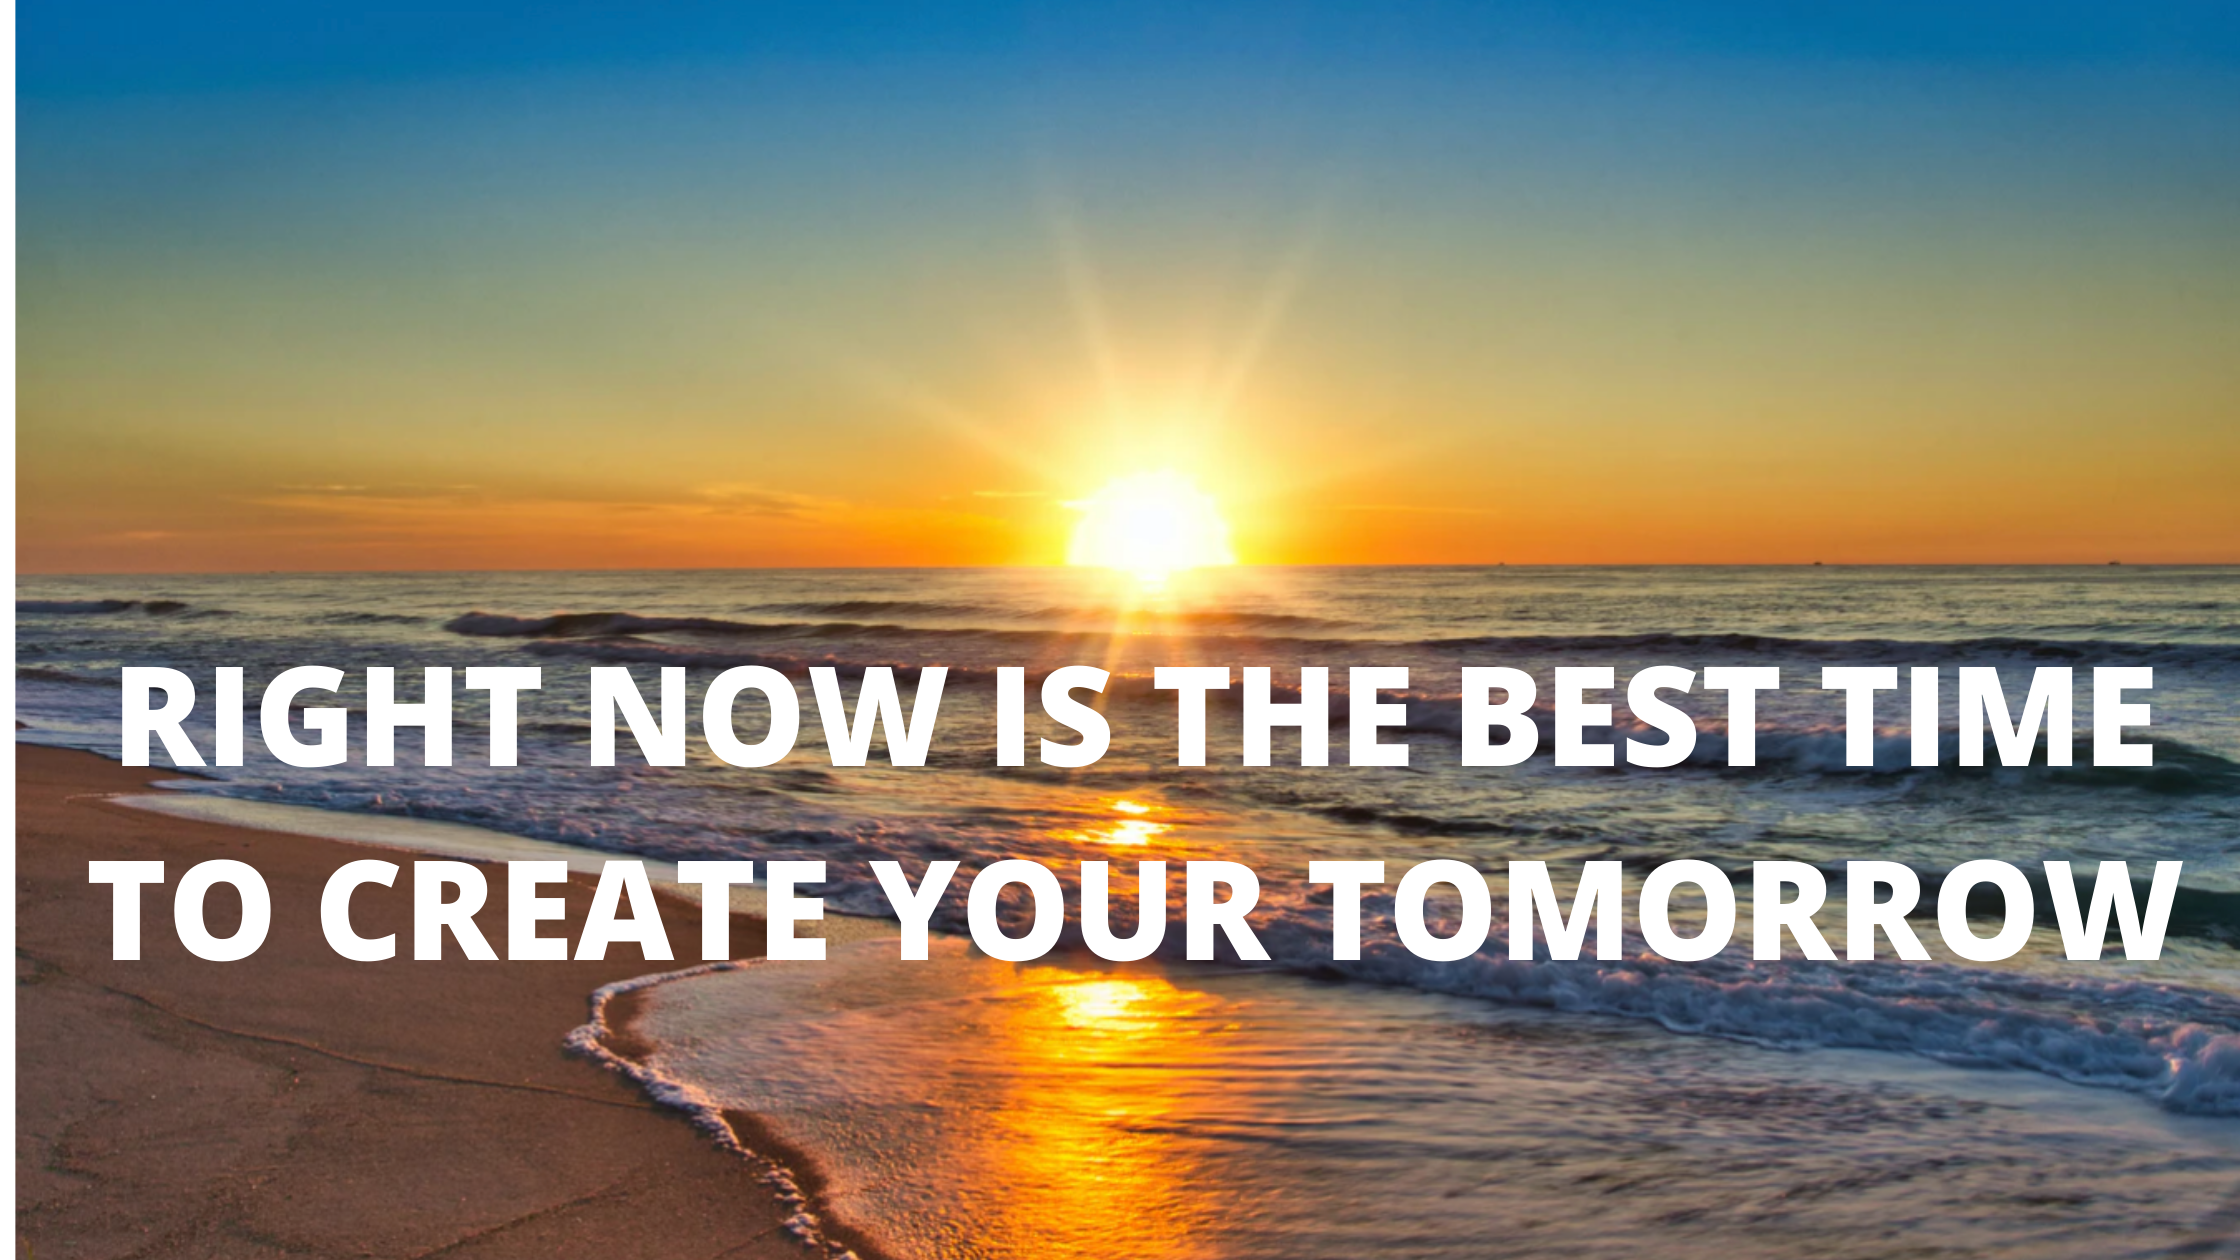 RIGHT NOW IS THE BEST TIME TO CREATE YOUR TOMORROW